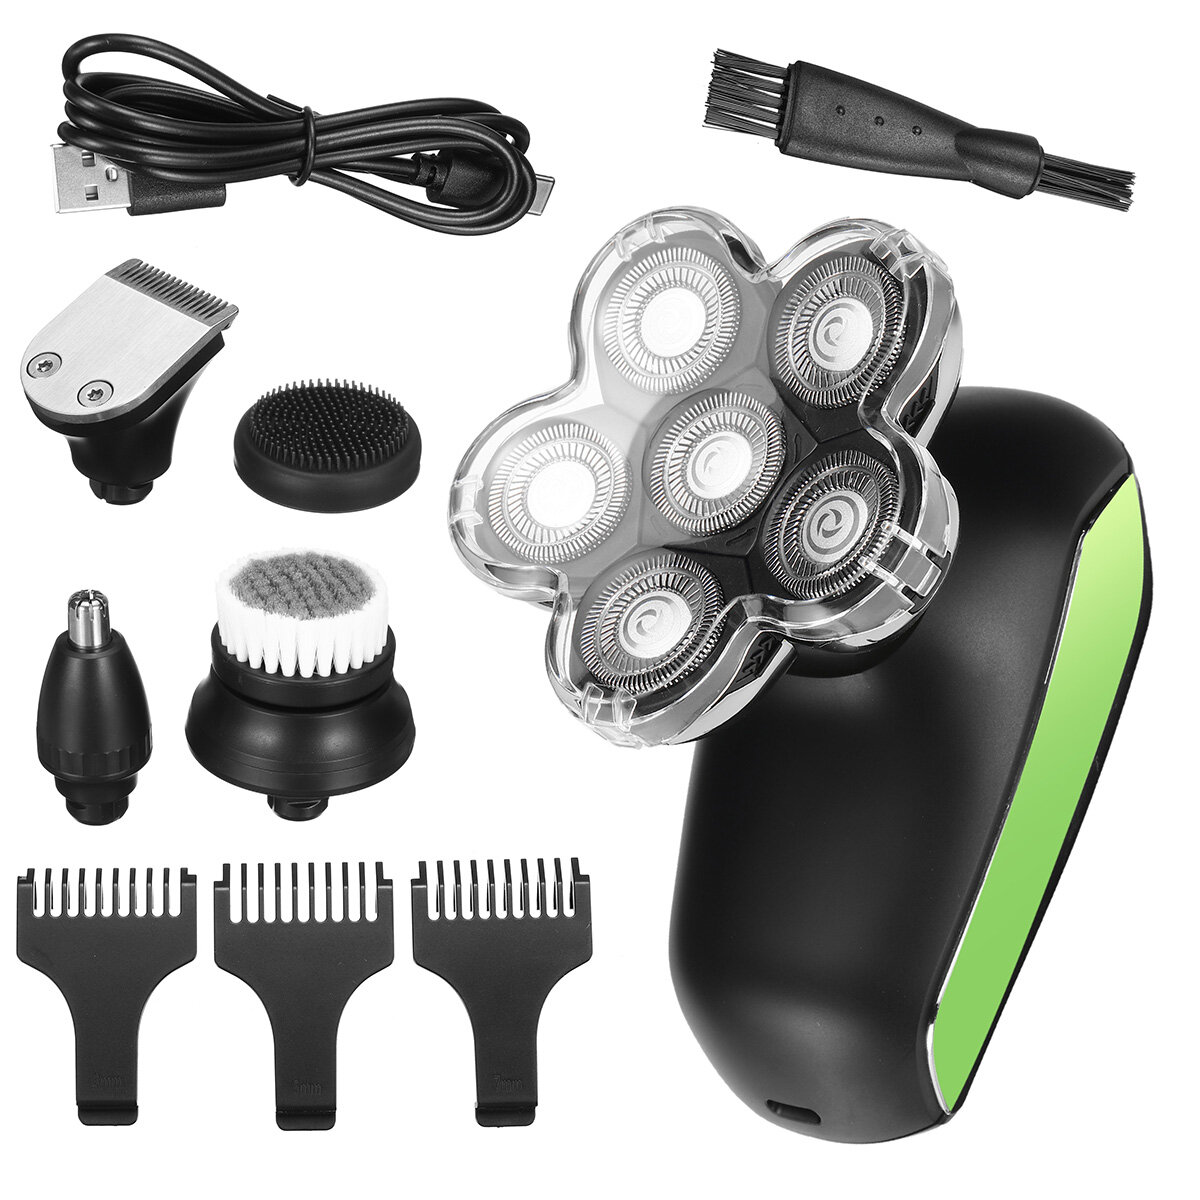 5 IN 1 6D Smart Display Electric Rotary Shaver Portable Rechargeable Bald Head Trimmer Razor Kit